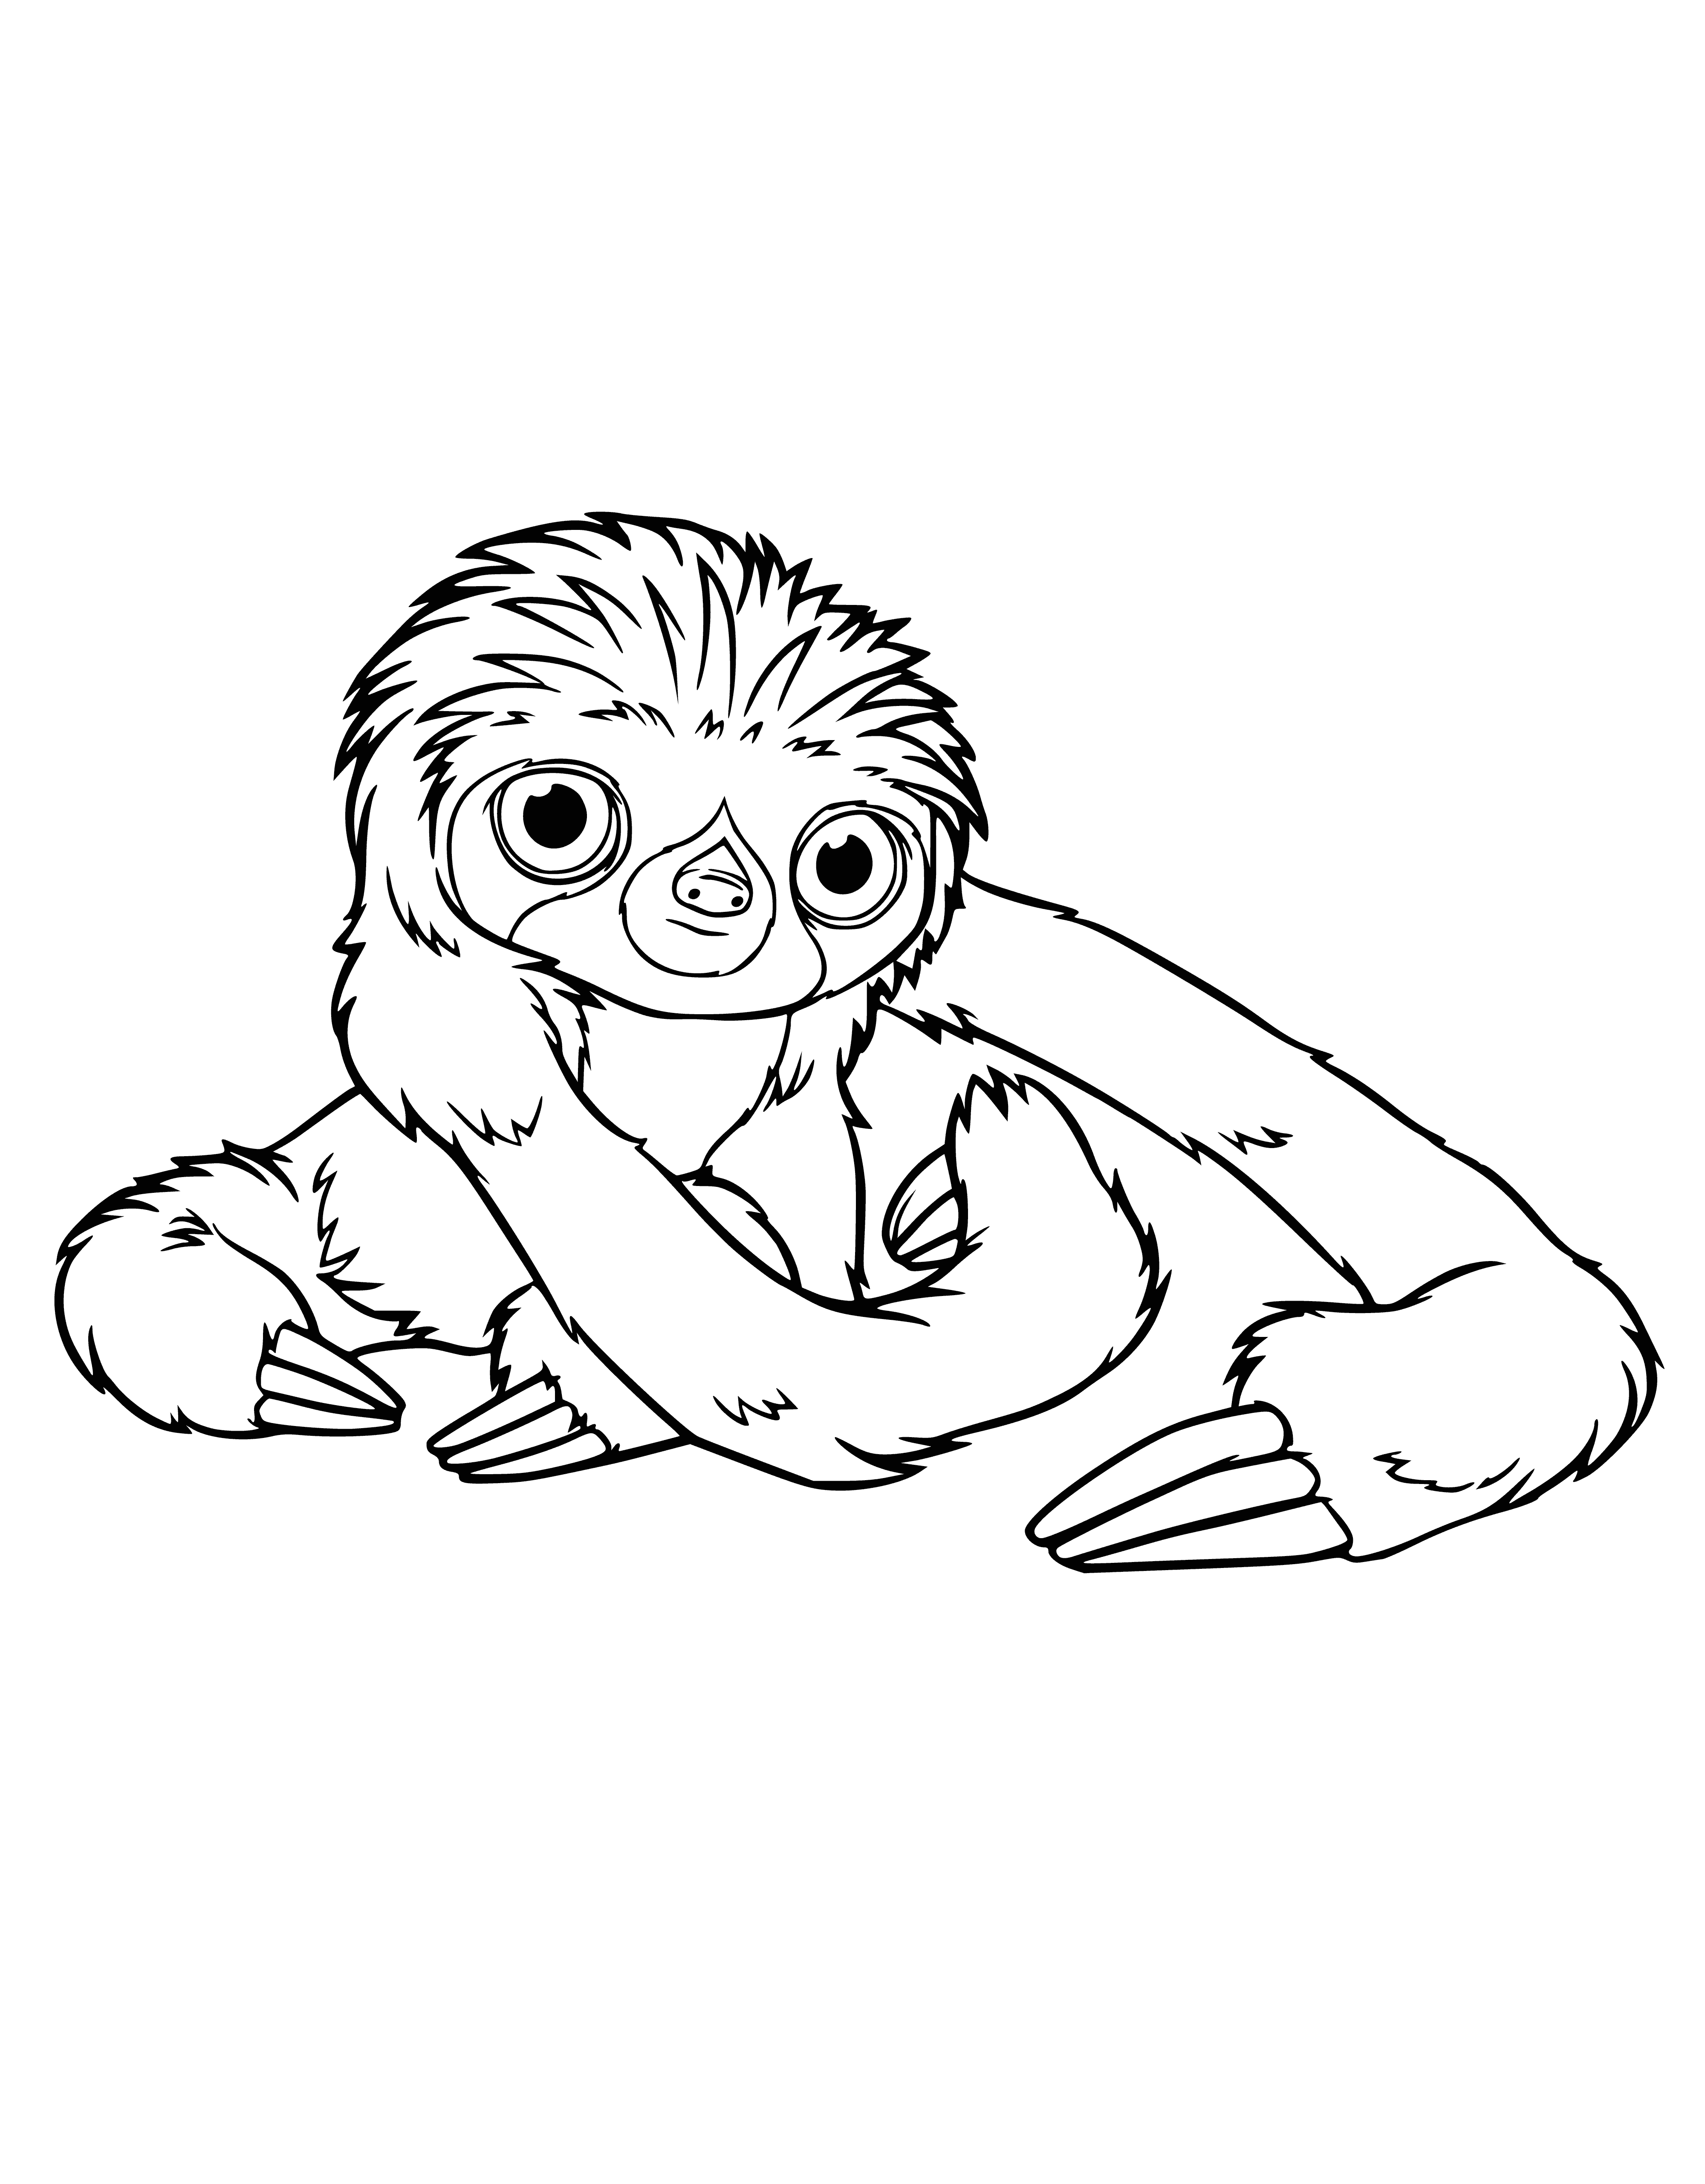 Sash - Pet of the Small coloring page